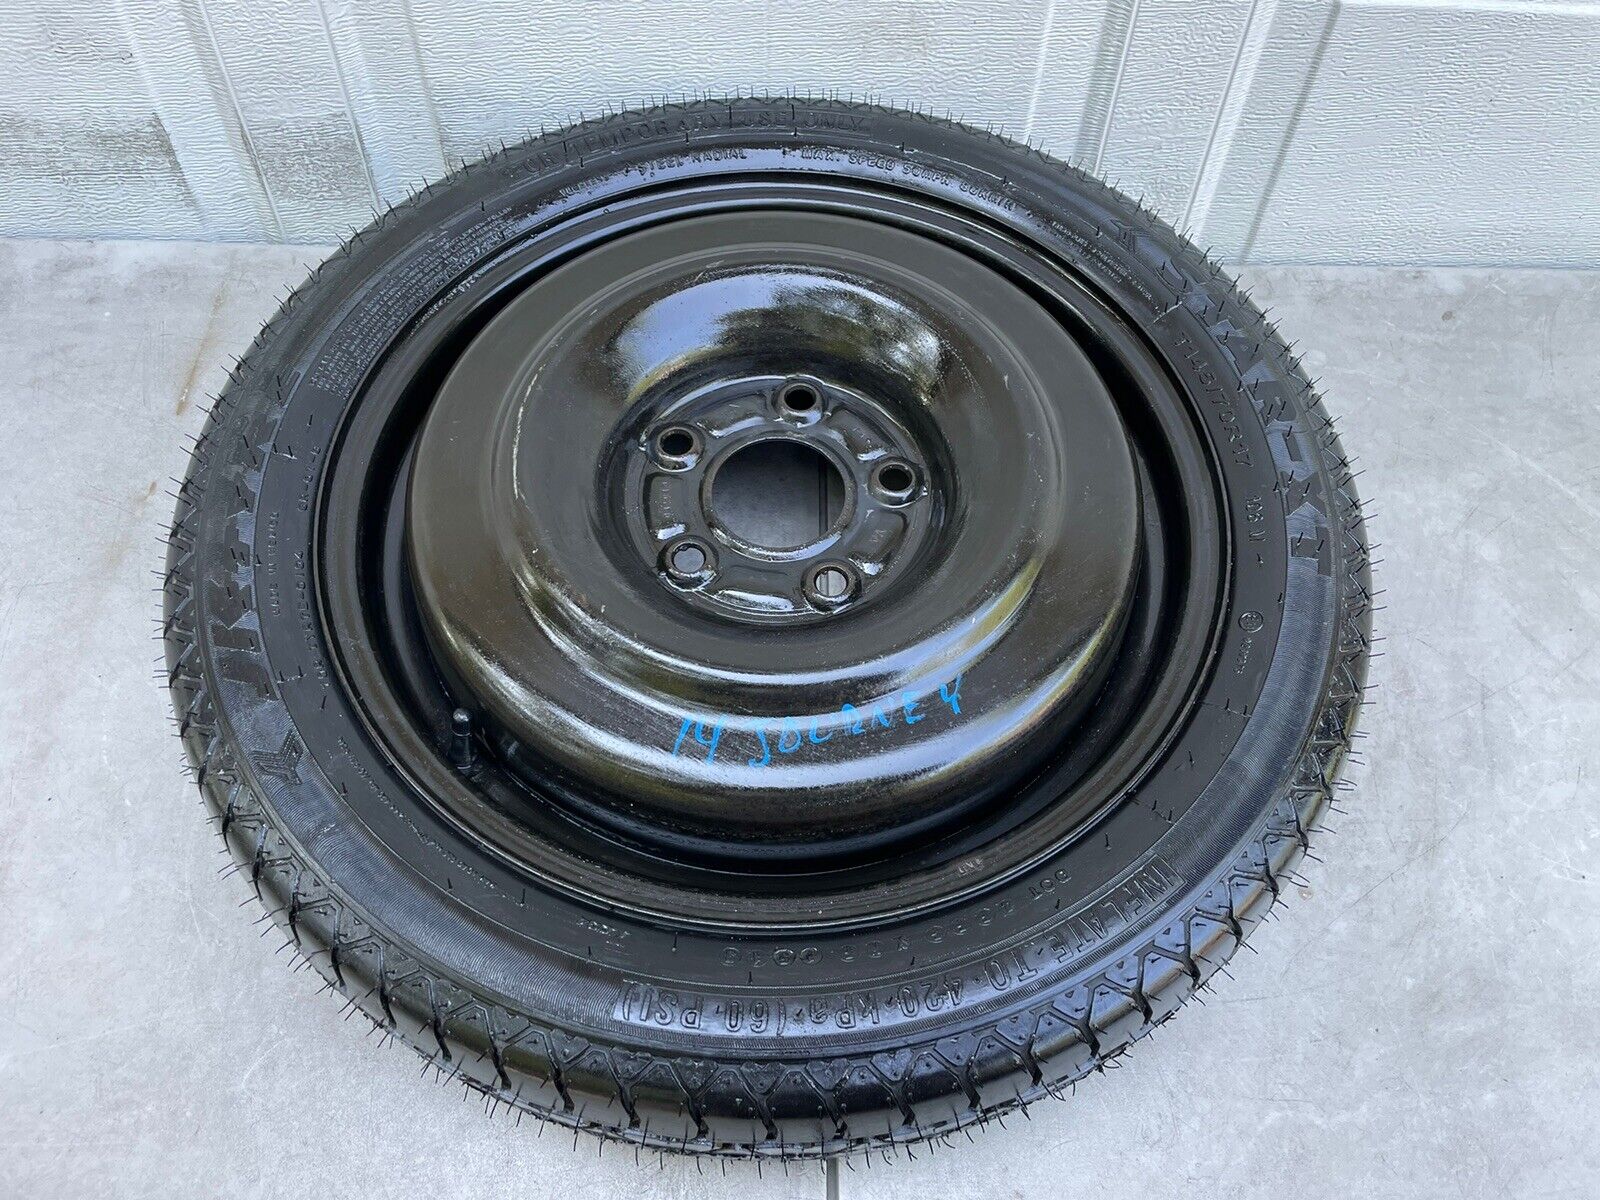 2009-2020 DODGE JOURNEY EMERGENCY SPARE TIRE COMPACT DONUT RIM & TIRE 145/70R17